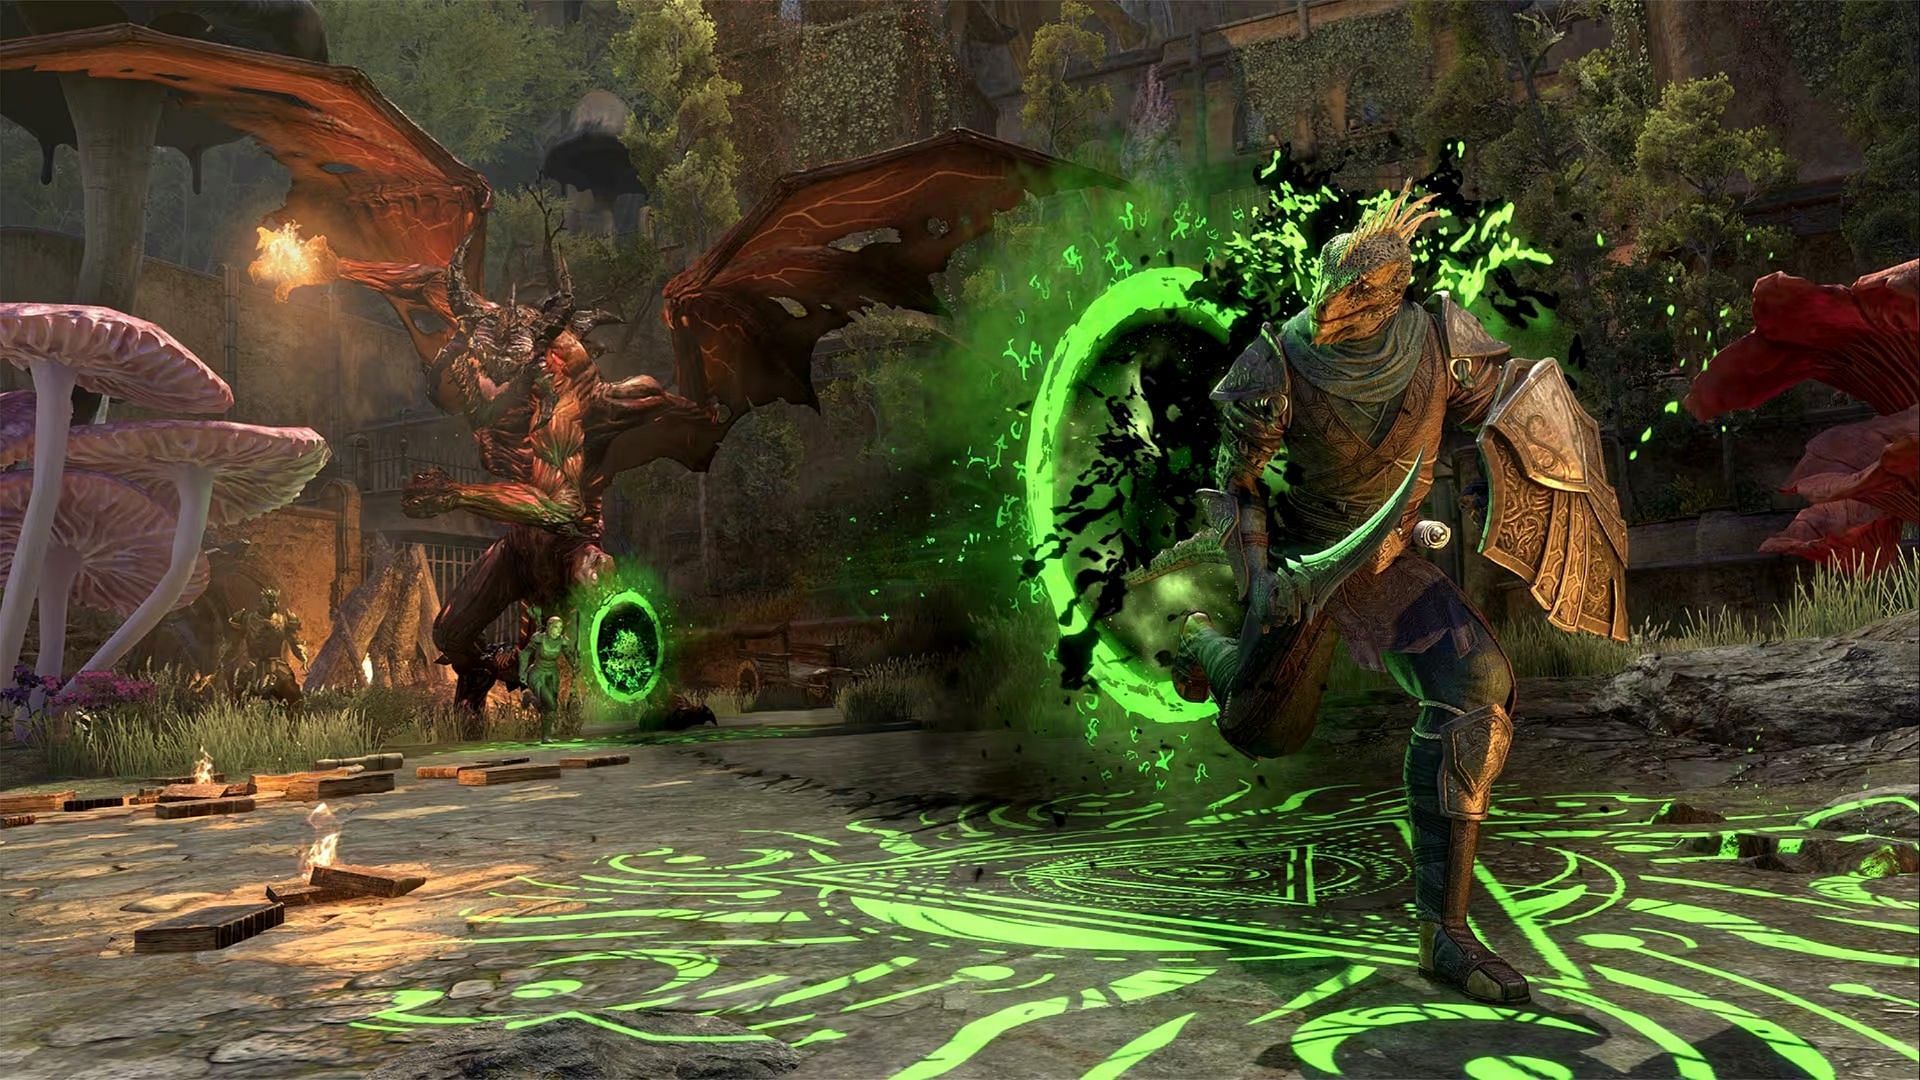 If you want to preview some of the Elder Scrolls Online: Necrom expansion, now you can!